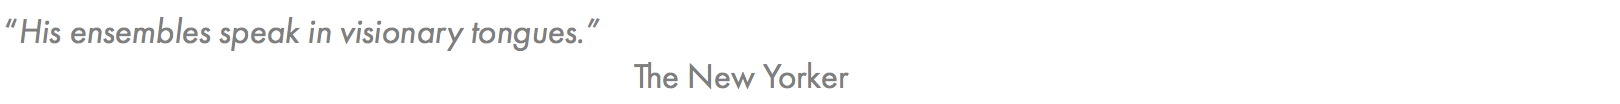 previte-nyorker-quote-grey-website.png